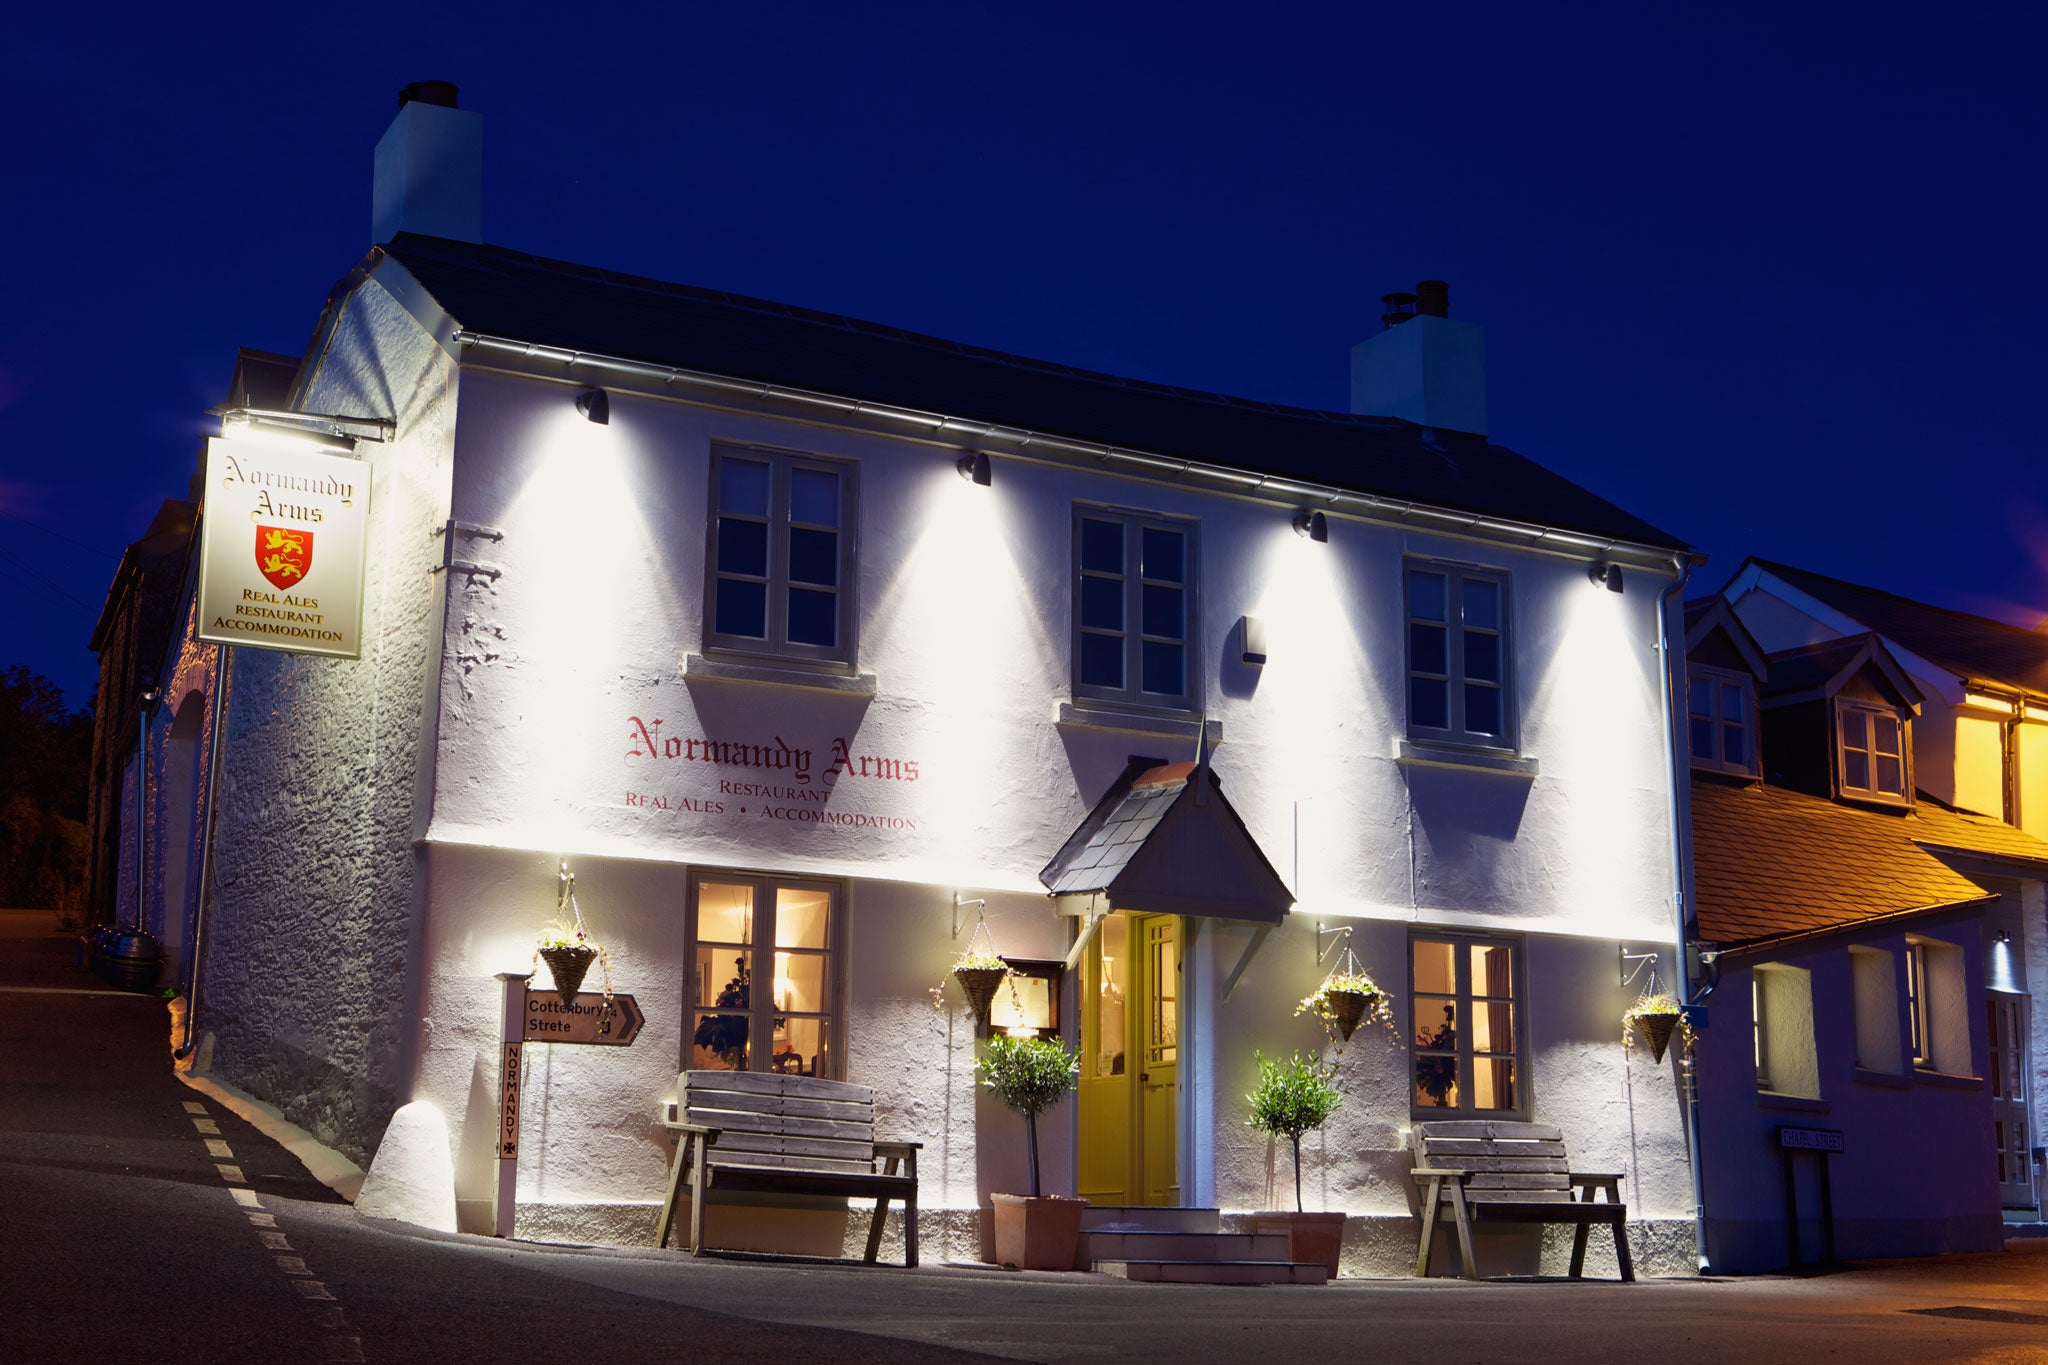 As good as it gets: The Normandy Arms is welcoming, warm, and homely